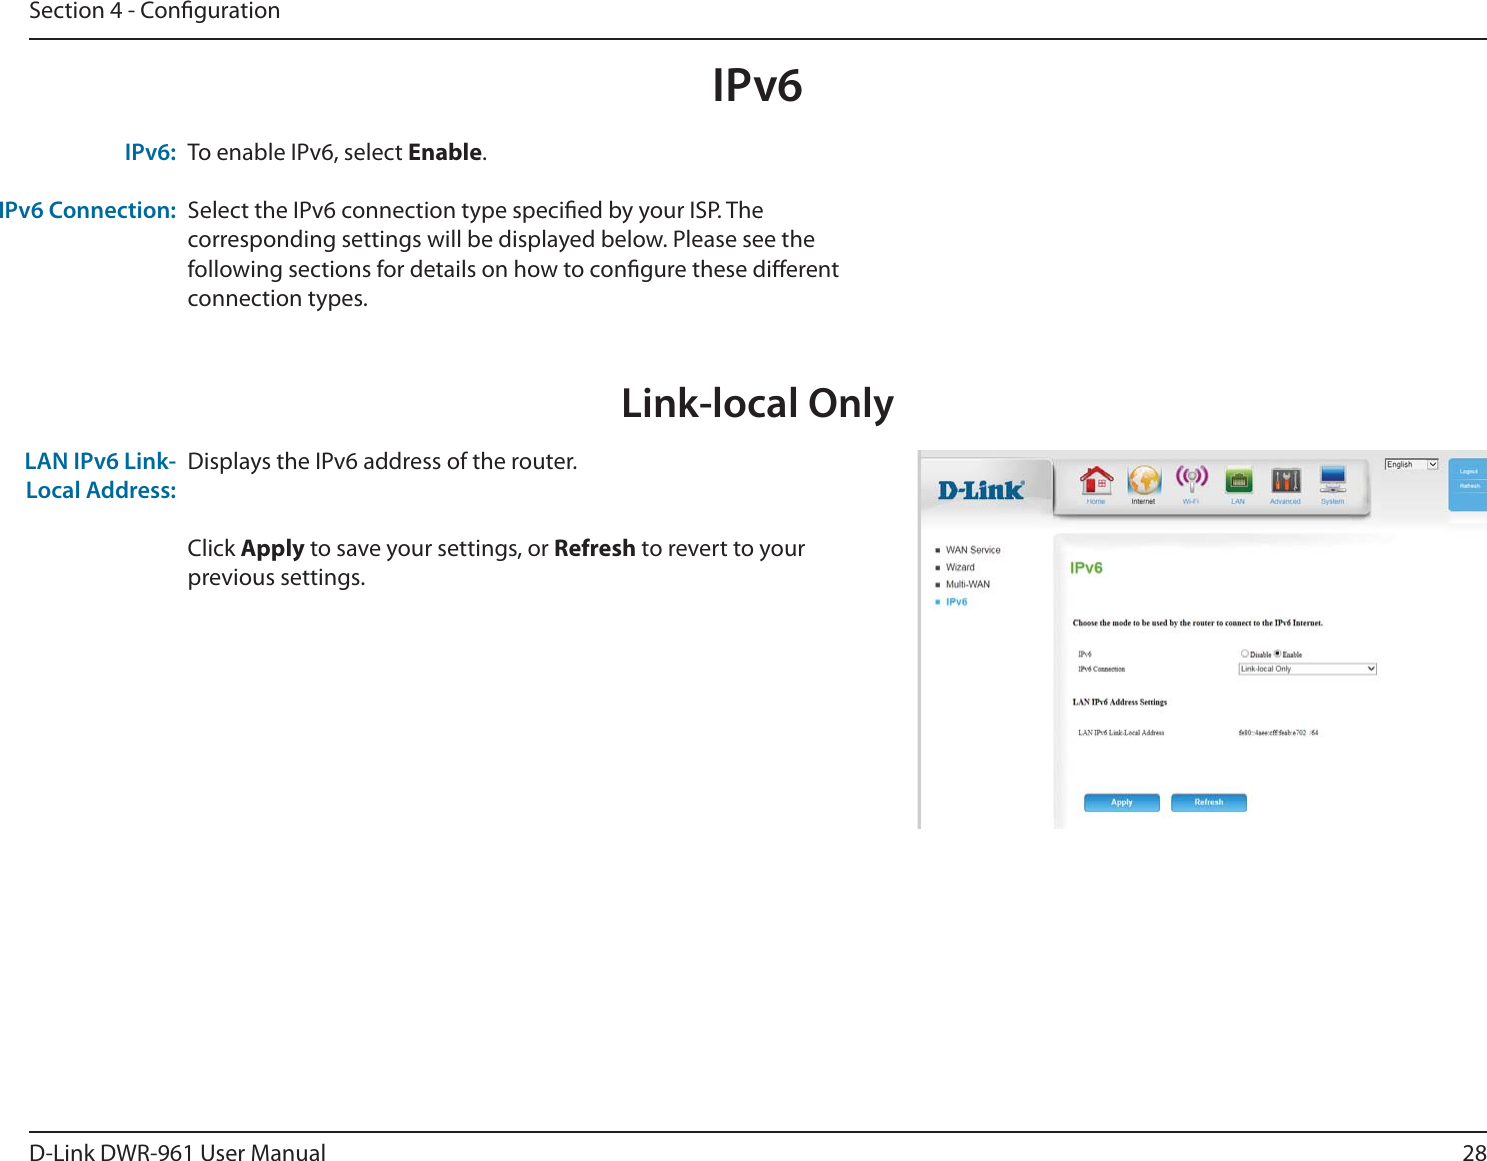 28D-Link DWR-9 User ManualSection 4 - CongurationIPv6Link-local OnlyDisplays the IPv6 address of the router.Click Apply to save your settings, or Refresh to revert to your previous settings.LAN IPv6 Link-Local Address:To enable IPv6, select Enable.Select the IPv6 connection type specied by your ISP. The corresponding settings will be displayed below. Please see the following sections for details on how to congure these dierent connection types.IPv6:IPv6 Connection: